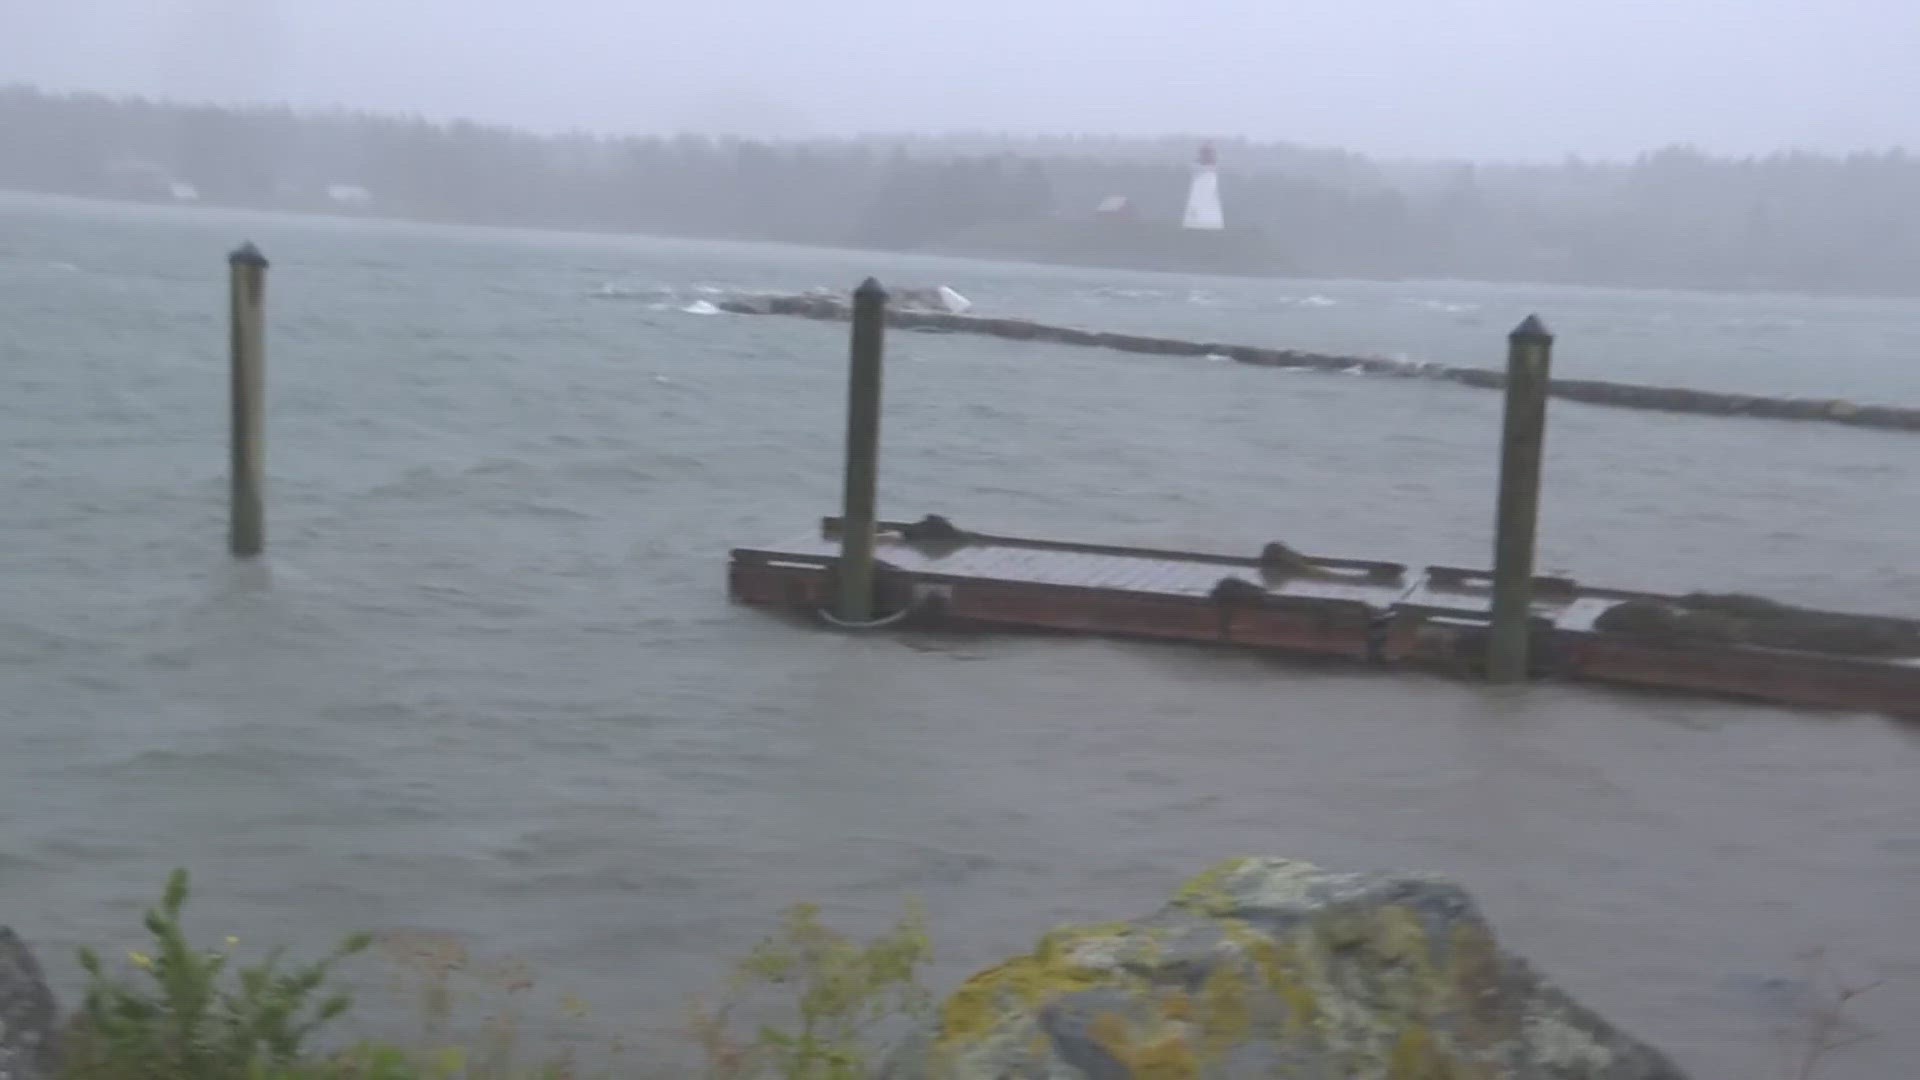 NEWS CENTER Maine's Donovan Lynch reports from Lubec, where heavy winds and rain continue to bear down along the coast.